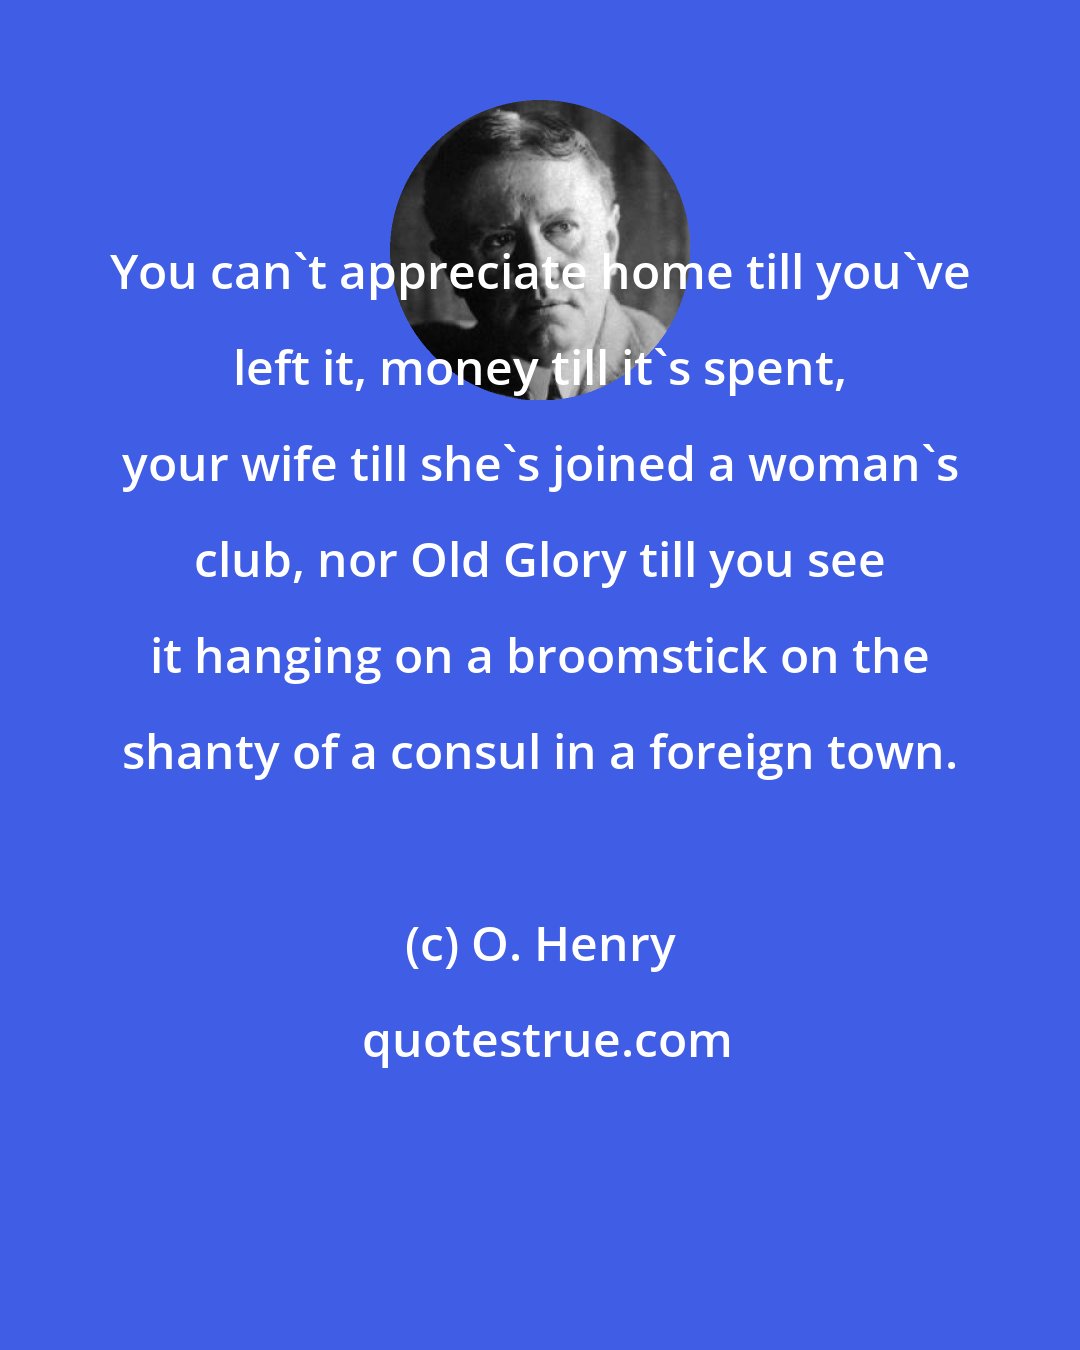 O. Henry: You can't appreciate home till you've left it, money till it's spent, your wife till she's joined a woman's club, nor Old Glory till you see it hanging on a broomstick on the shanty of a consul in a foreign town.